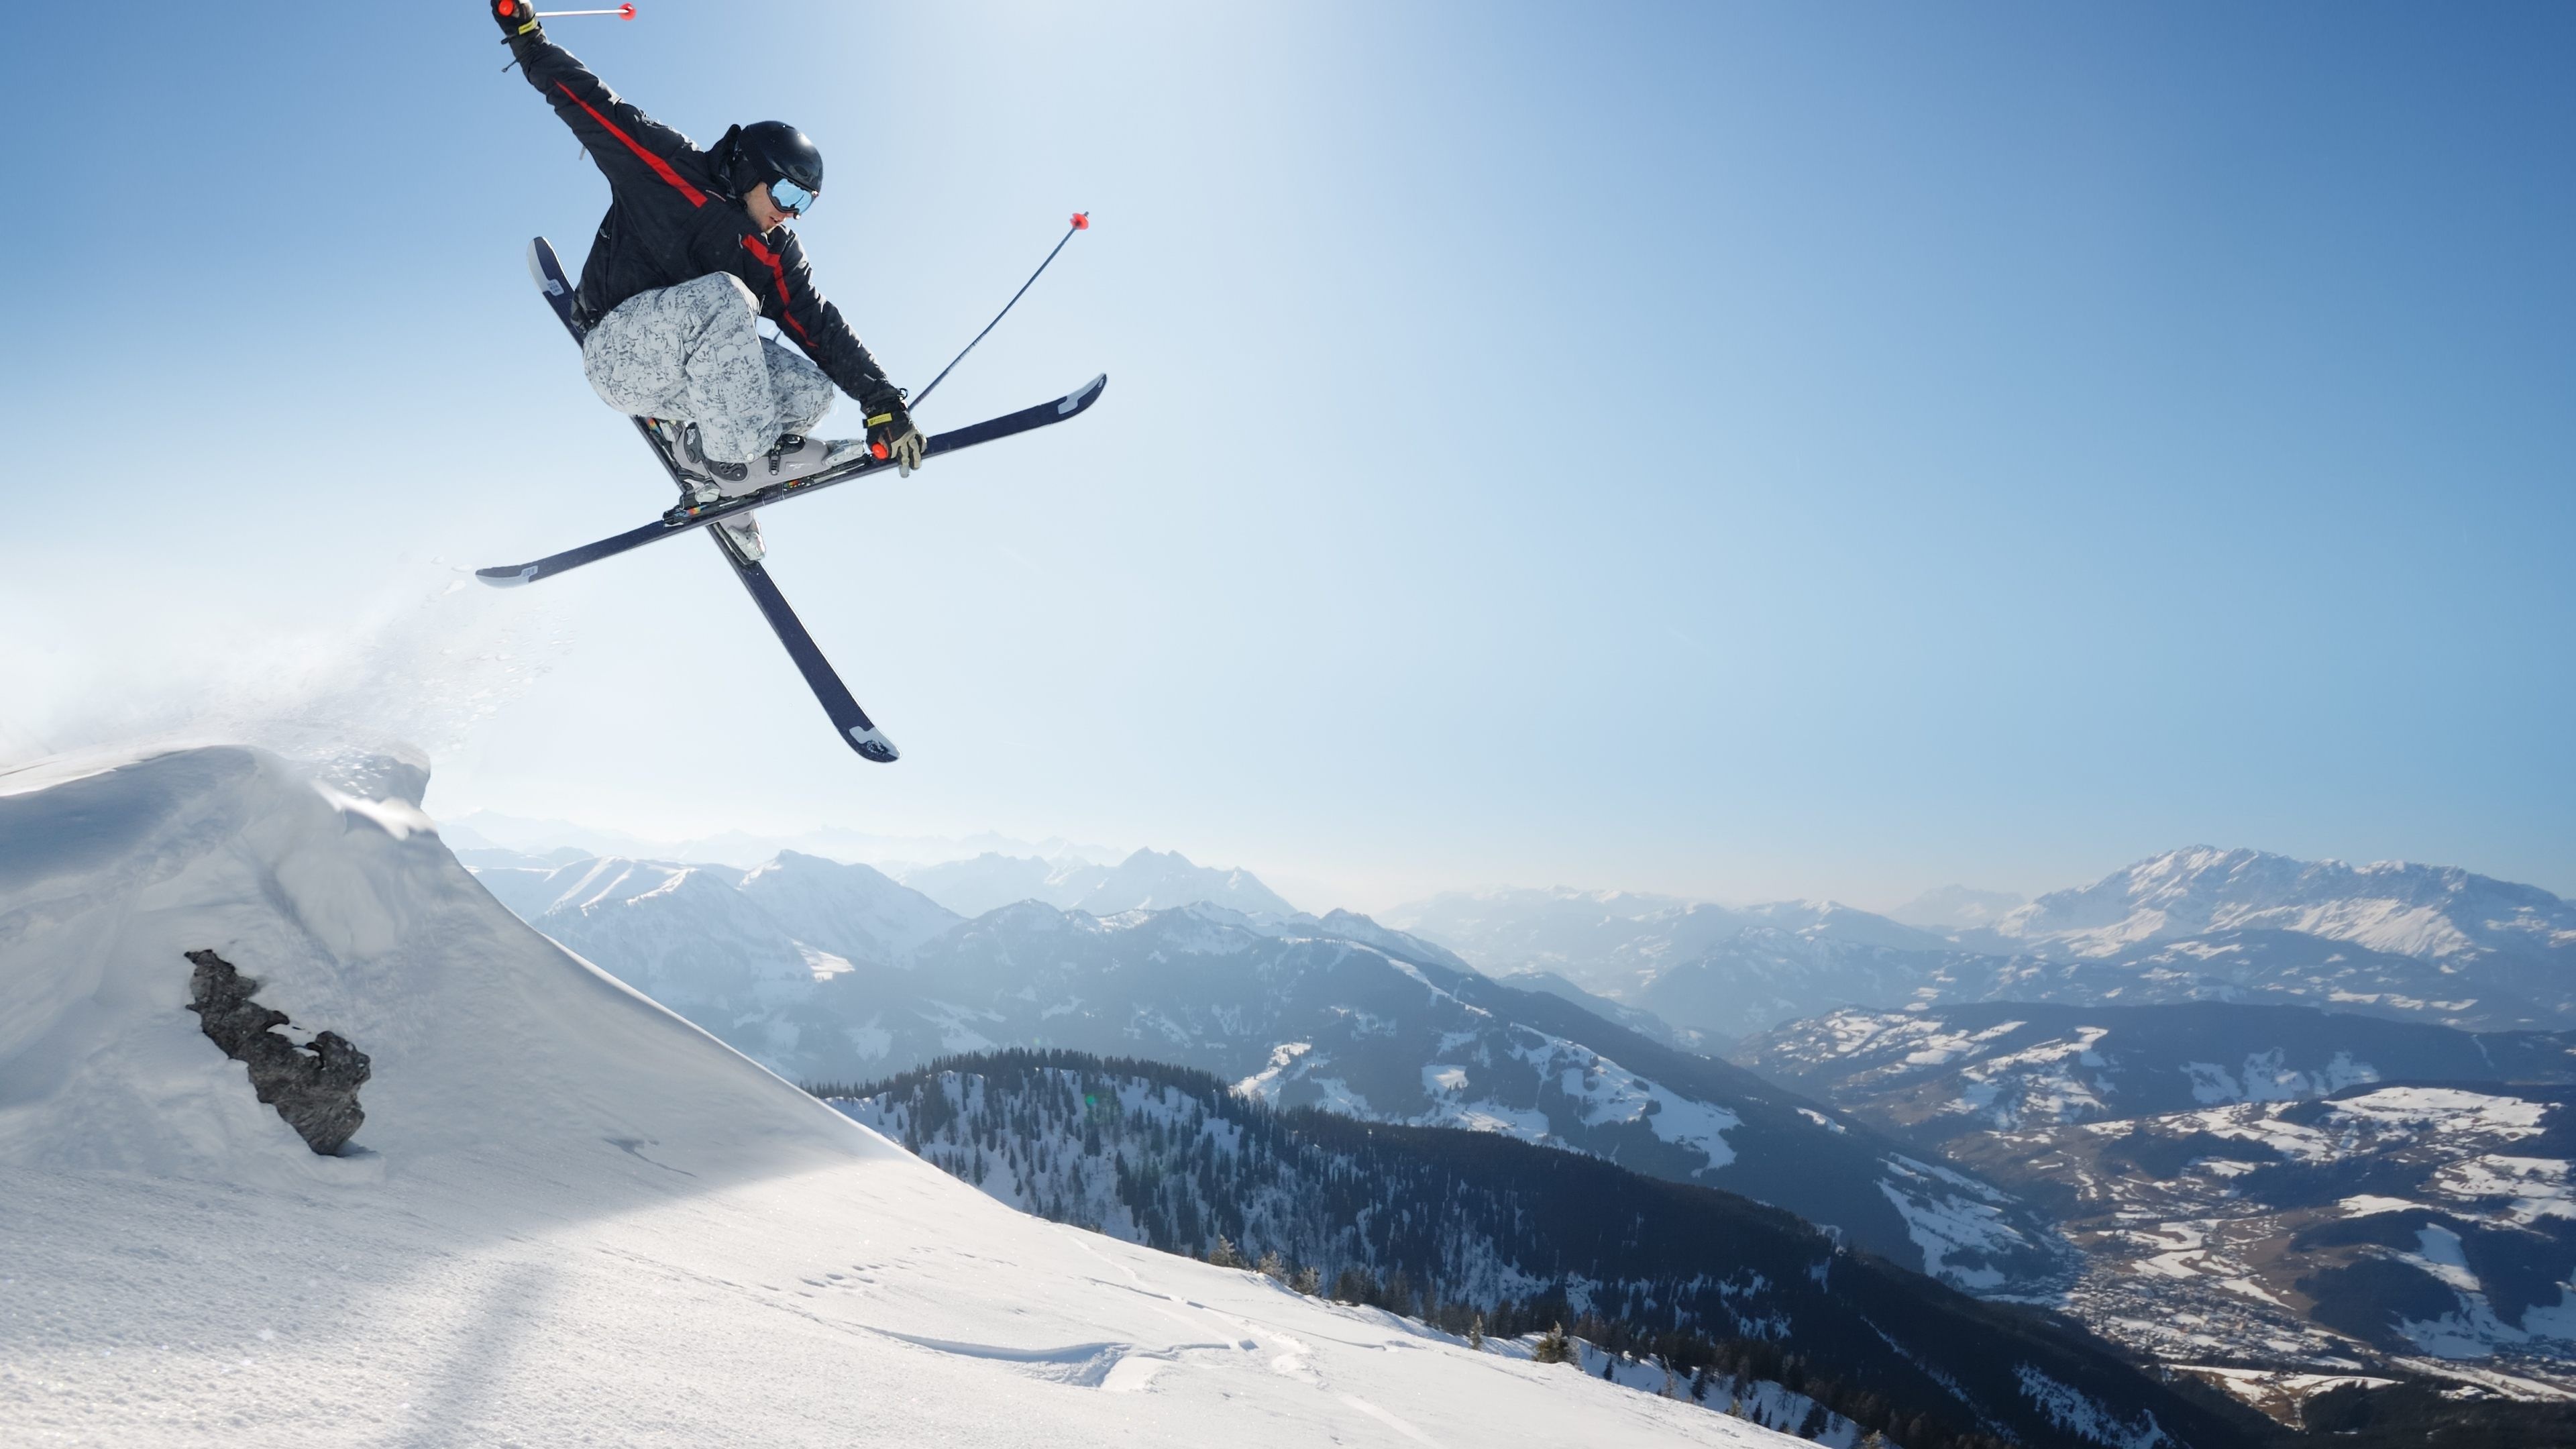 Skiing: Freestyle Skiing, A competitive winter sport, Extreme sports. 3840x2160 4K Background.